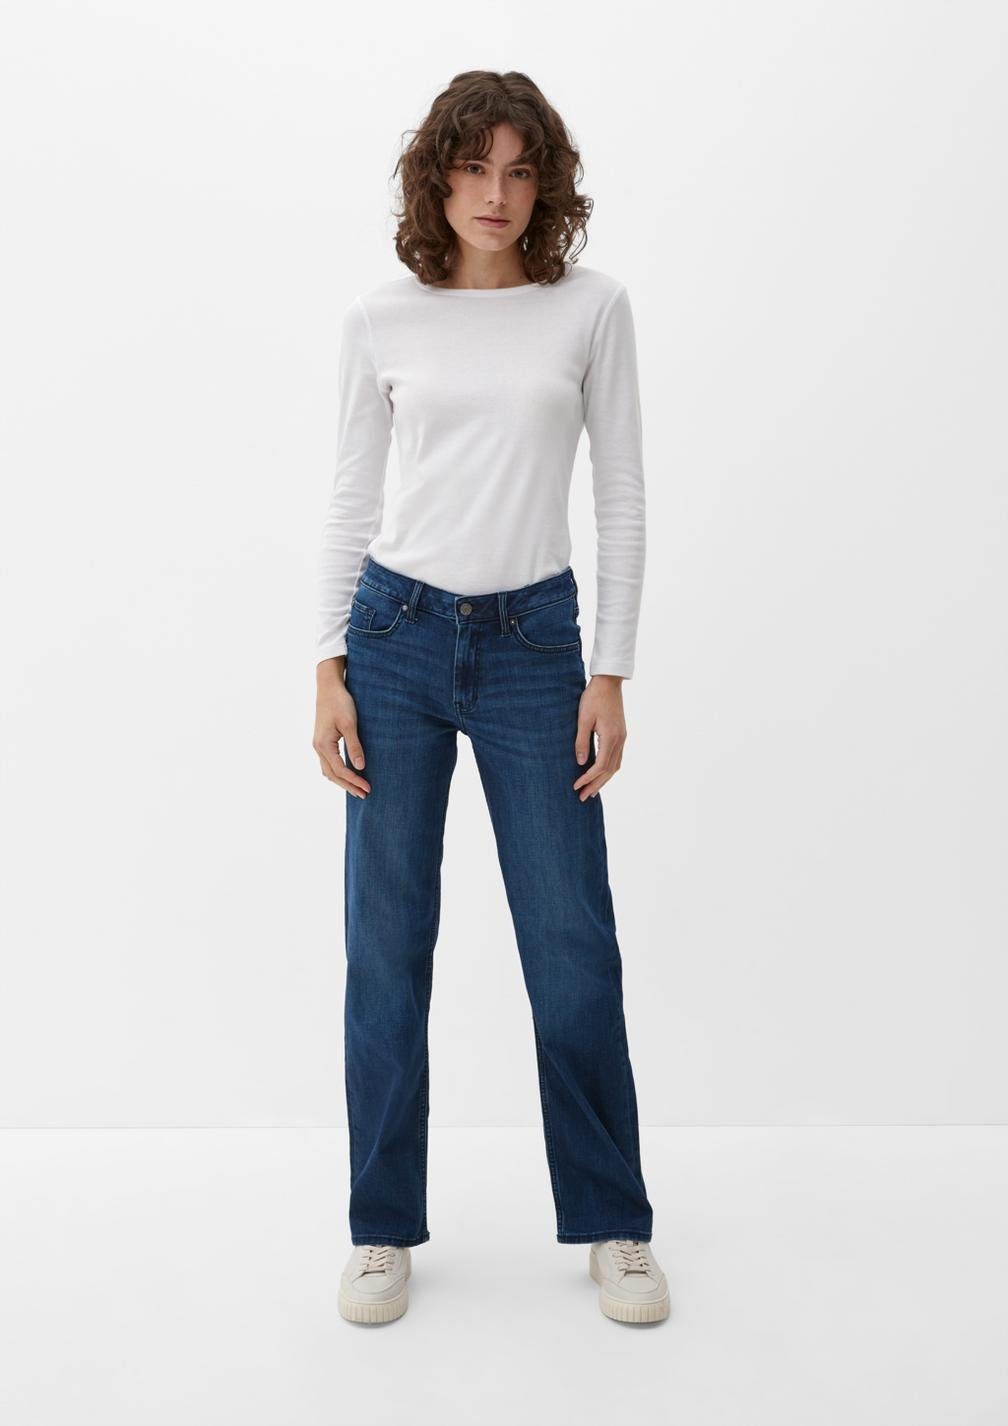 Comfort-fit-Jeans Waschung, Mid / Straight mit rise KAROLIN / tiefblau Fit s.Oliver Leg leichter Relaxed